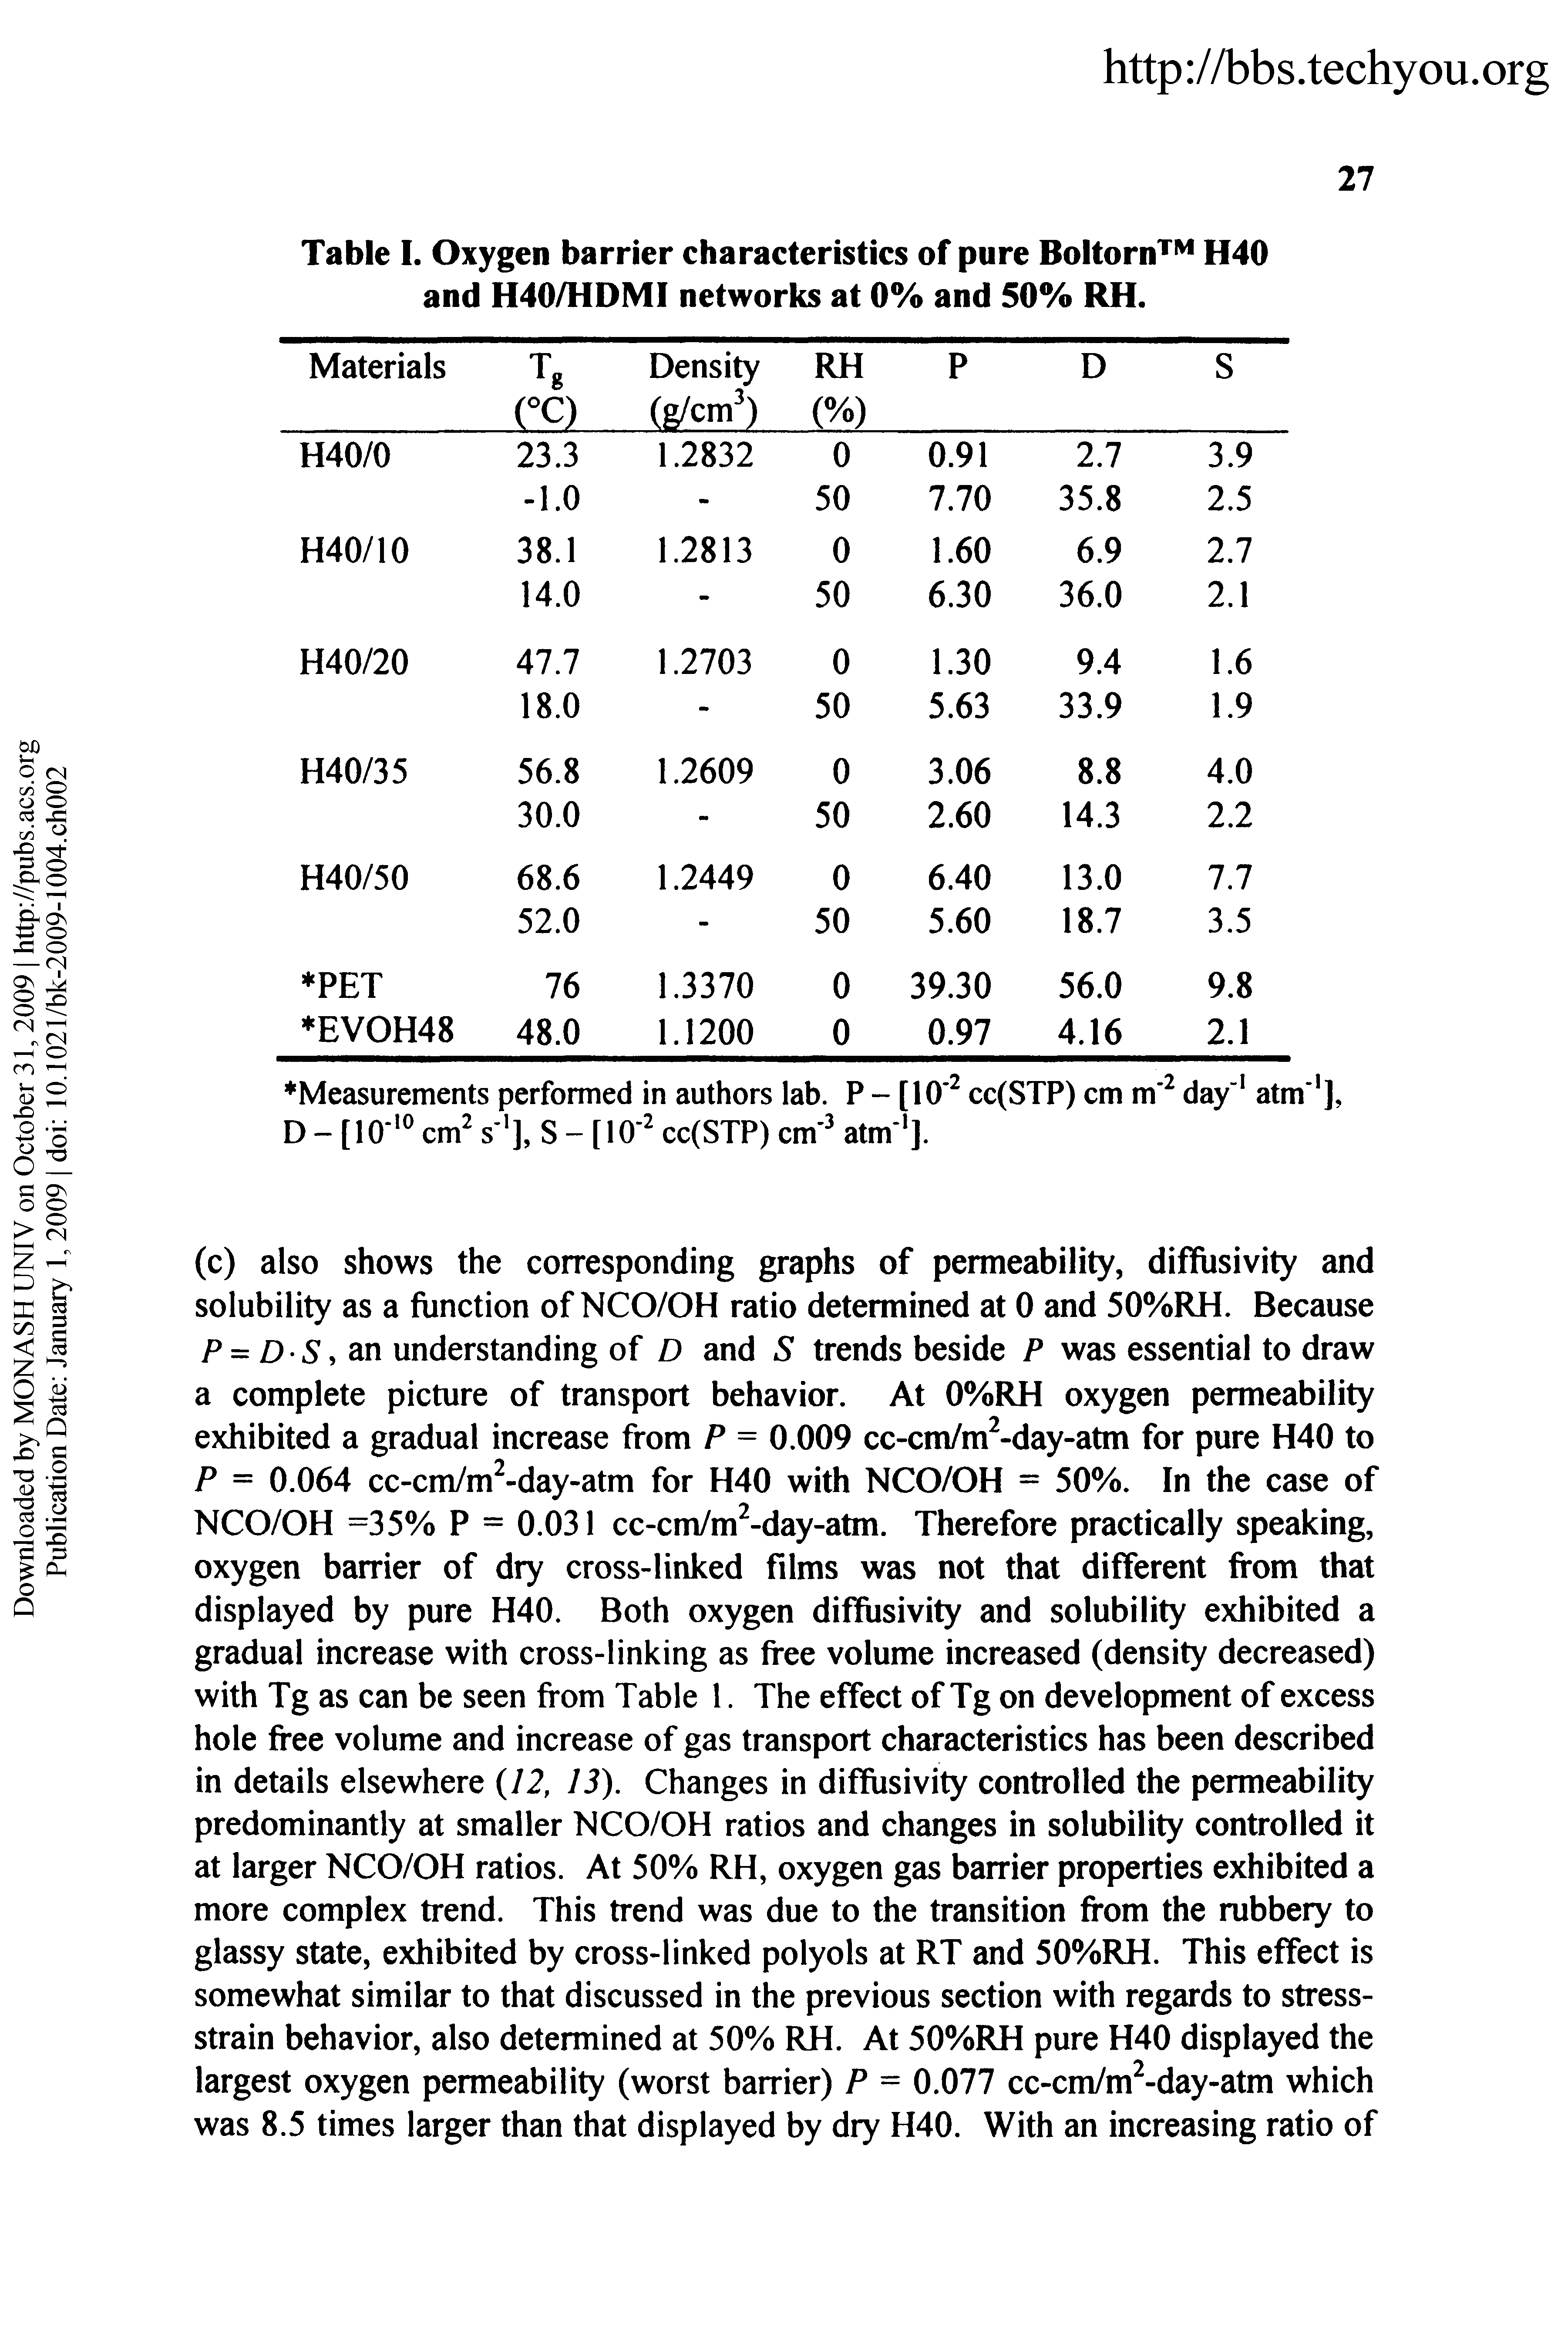 Table I. Oxygen barrier characteristics of pure Boltorn H40 and H40/HDMI networks at 0% and 50% RH.